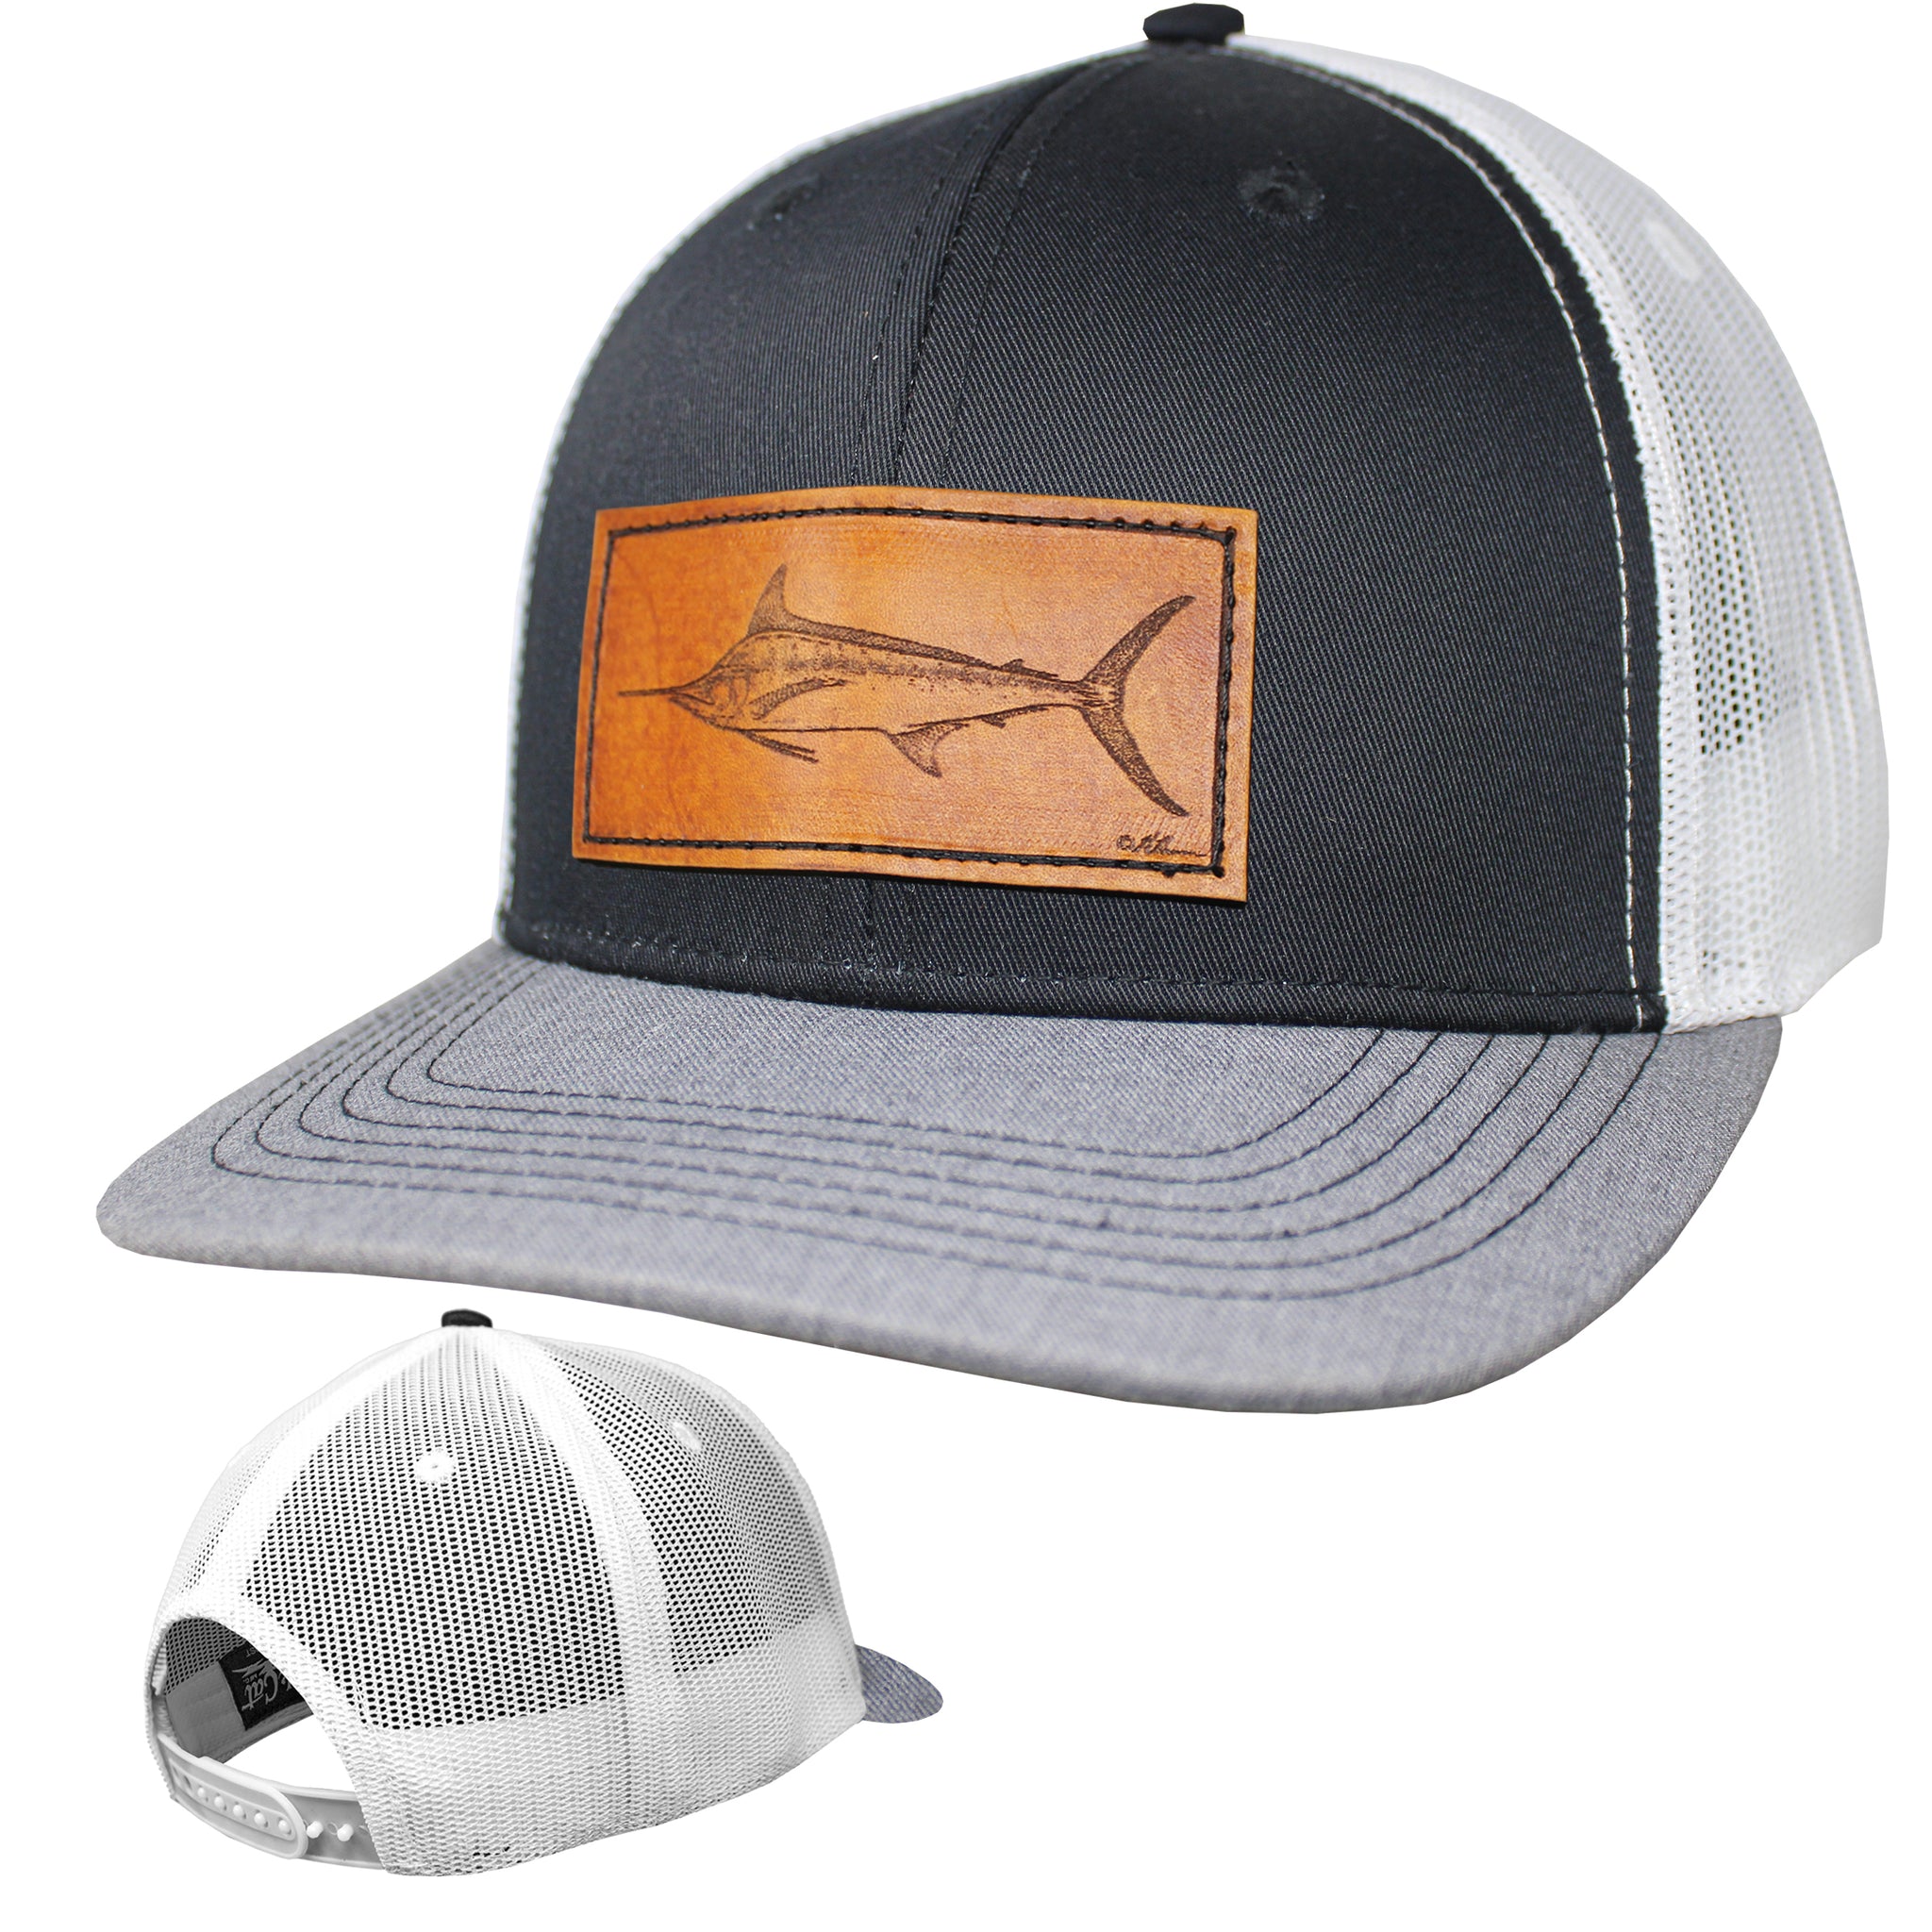 Trucker Performance Cap - Blue Marlin Leather Patch